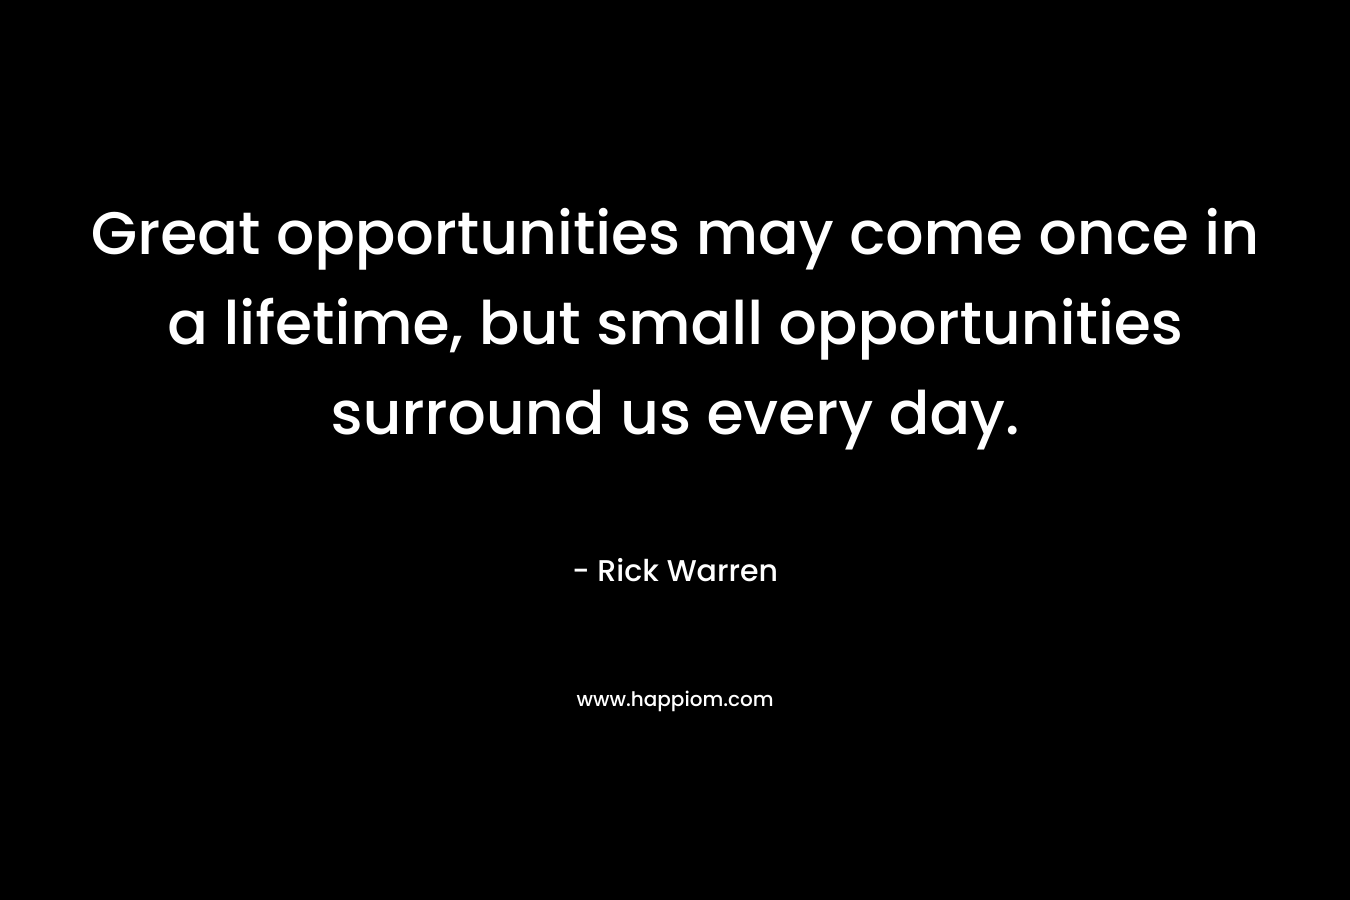 Great opportunities may come once in a lifetime, but small opportunities surround us every day.